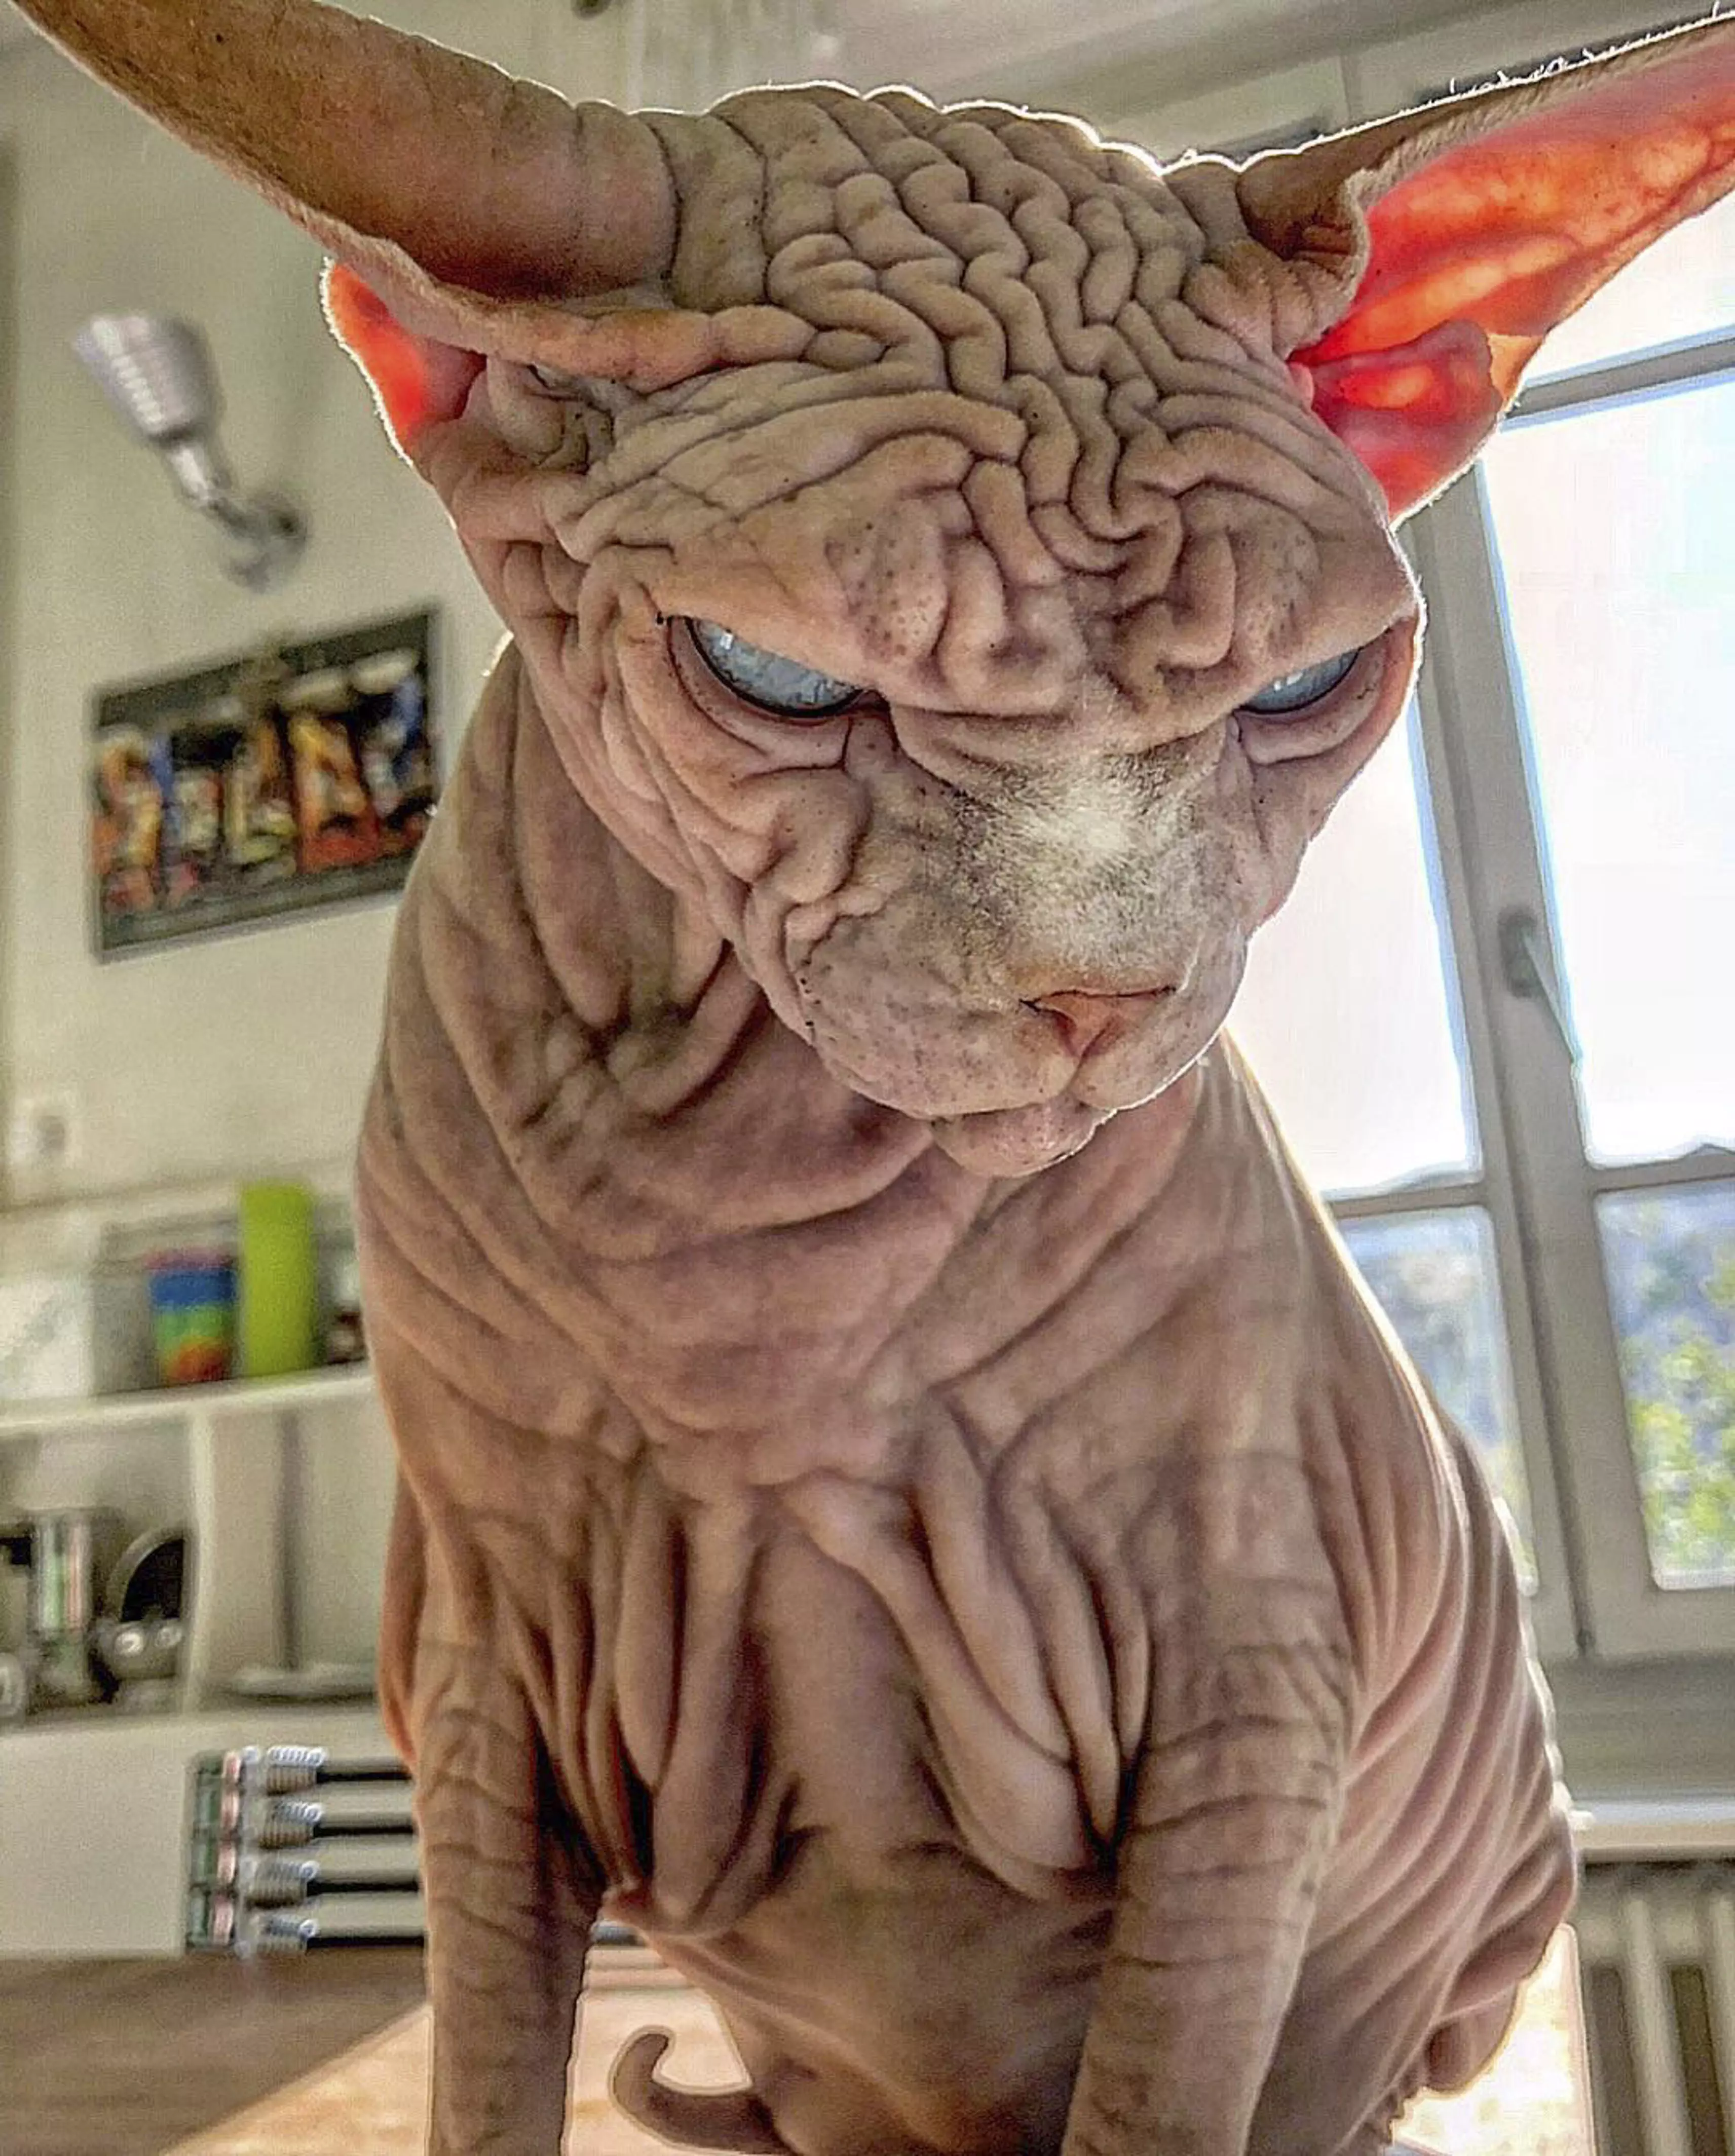 Strong Emperor Palpatine vibes from this cat.